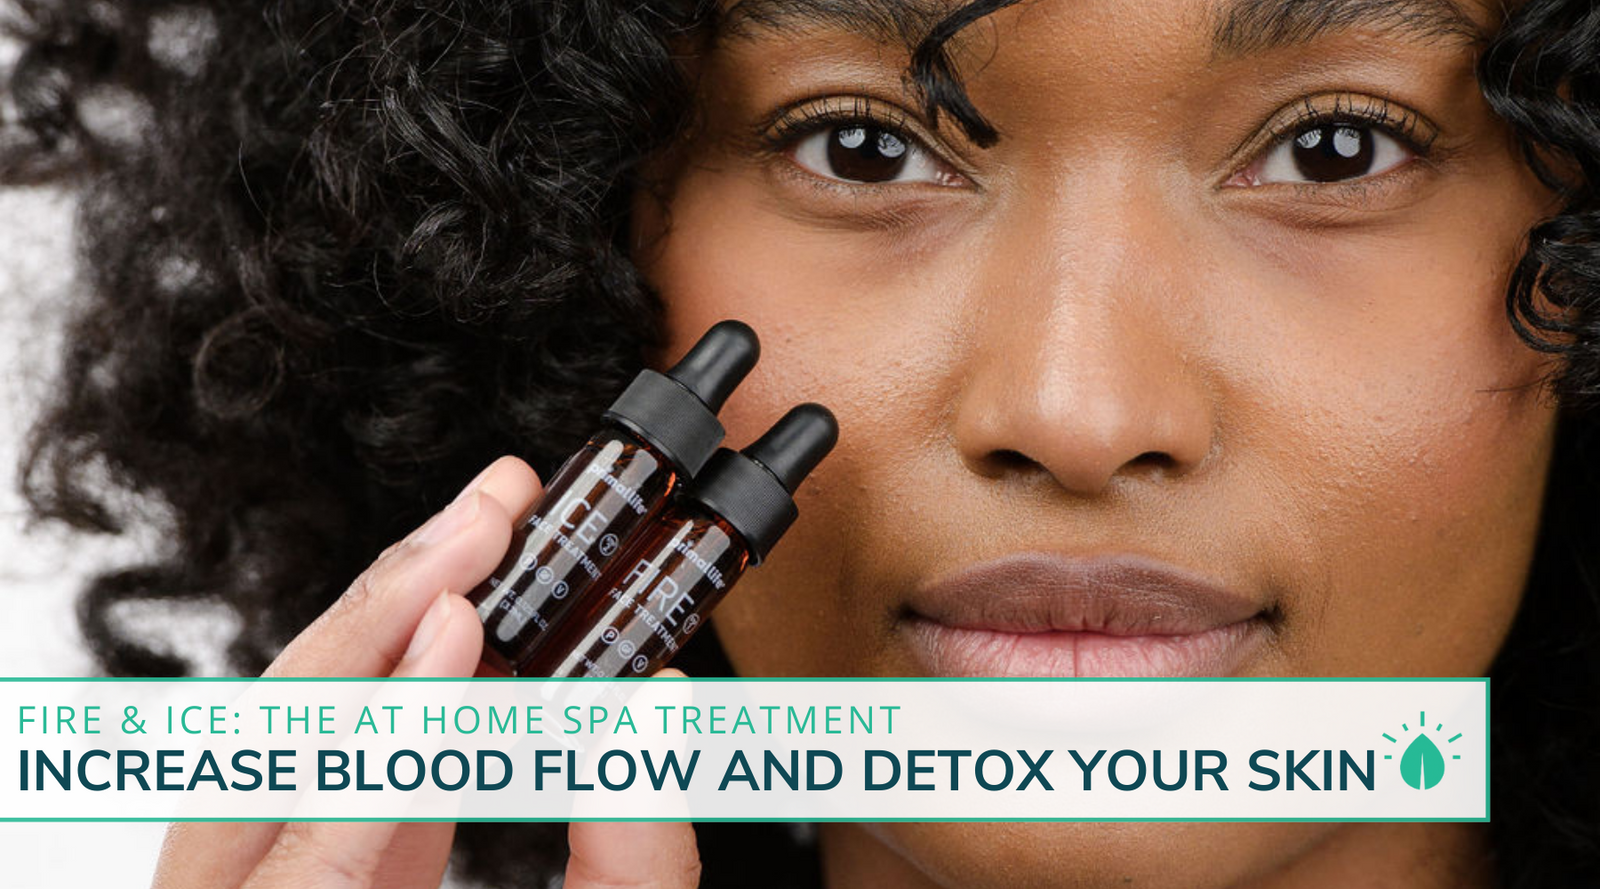 Increase Blood Flow & Detox Your Skin With Fire & Ice At-Home Spa Treatment